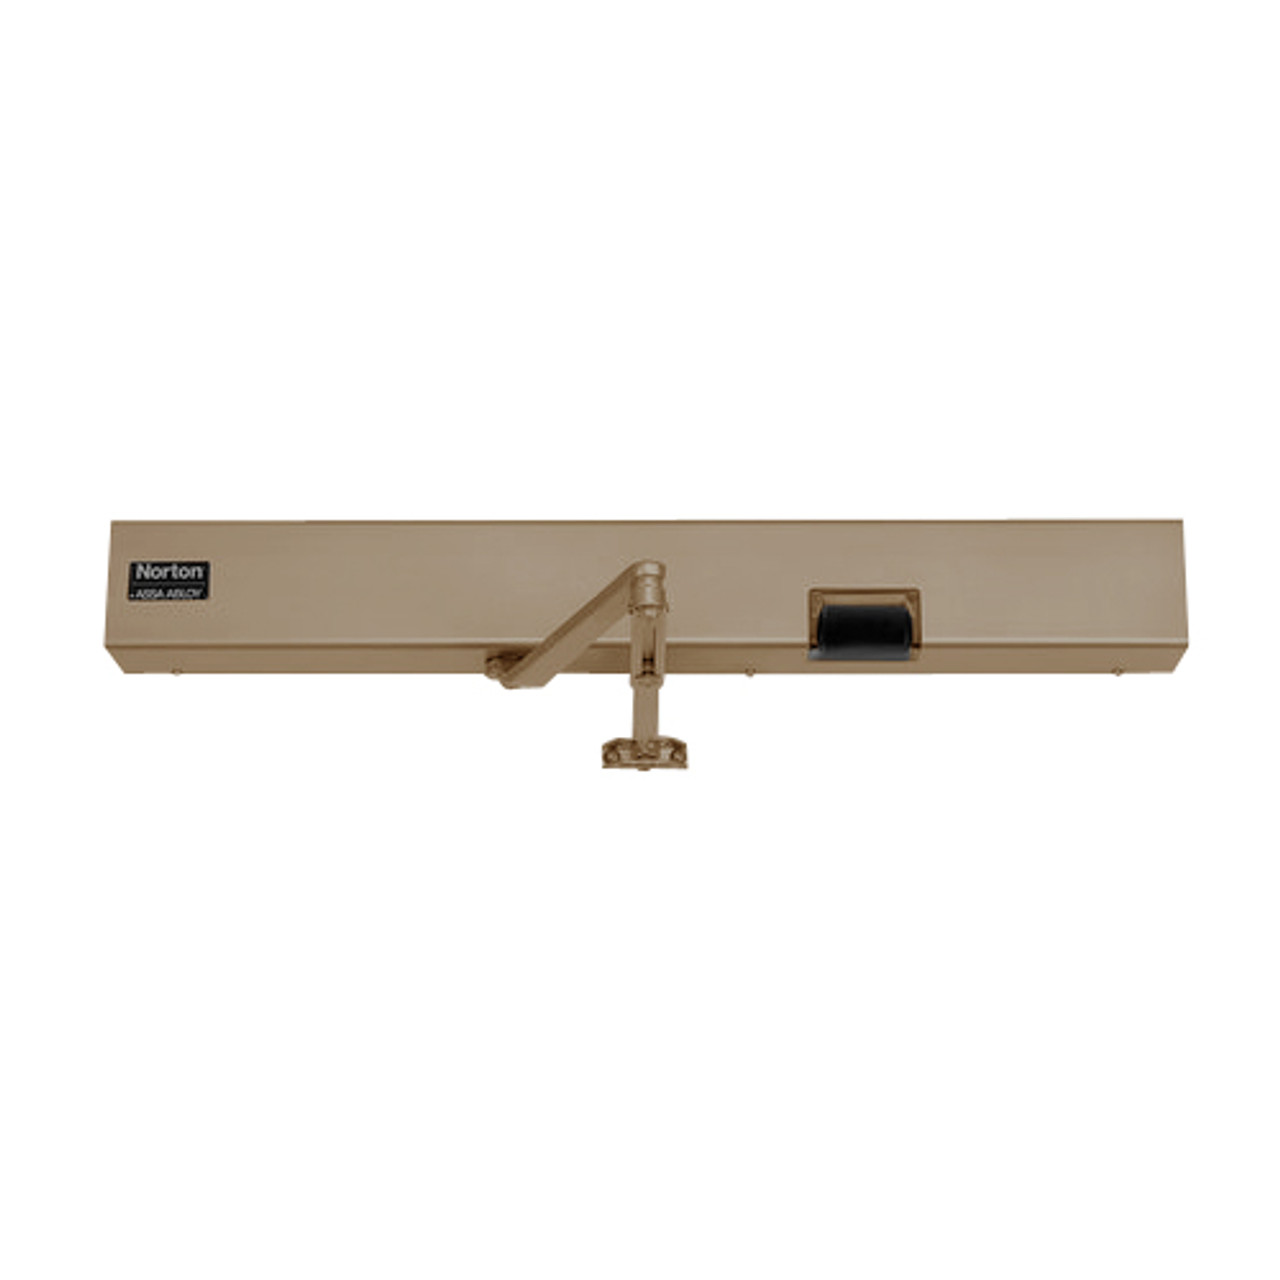 7123SZ-LH-120VAC-691 Norton 7100SZ Series Safe Zone Multi-Point Closer/Holder with Motion Sensor and Push Side Double Lever 11 inch Main Arm in Dull Bronze Finish